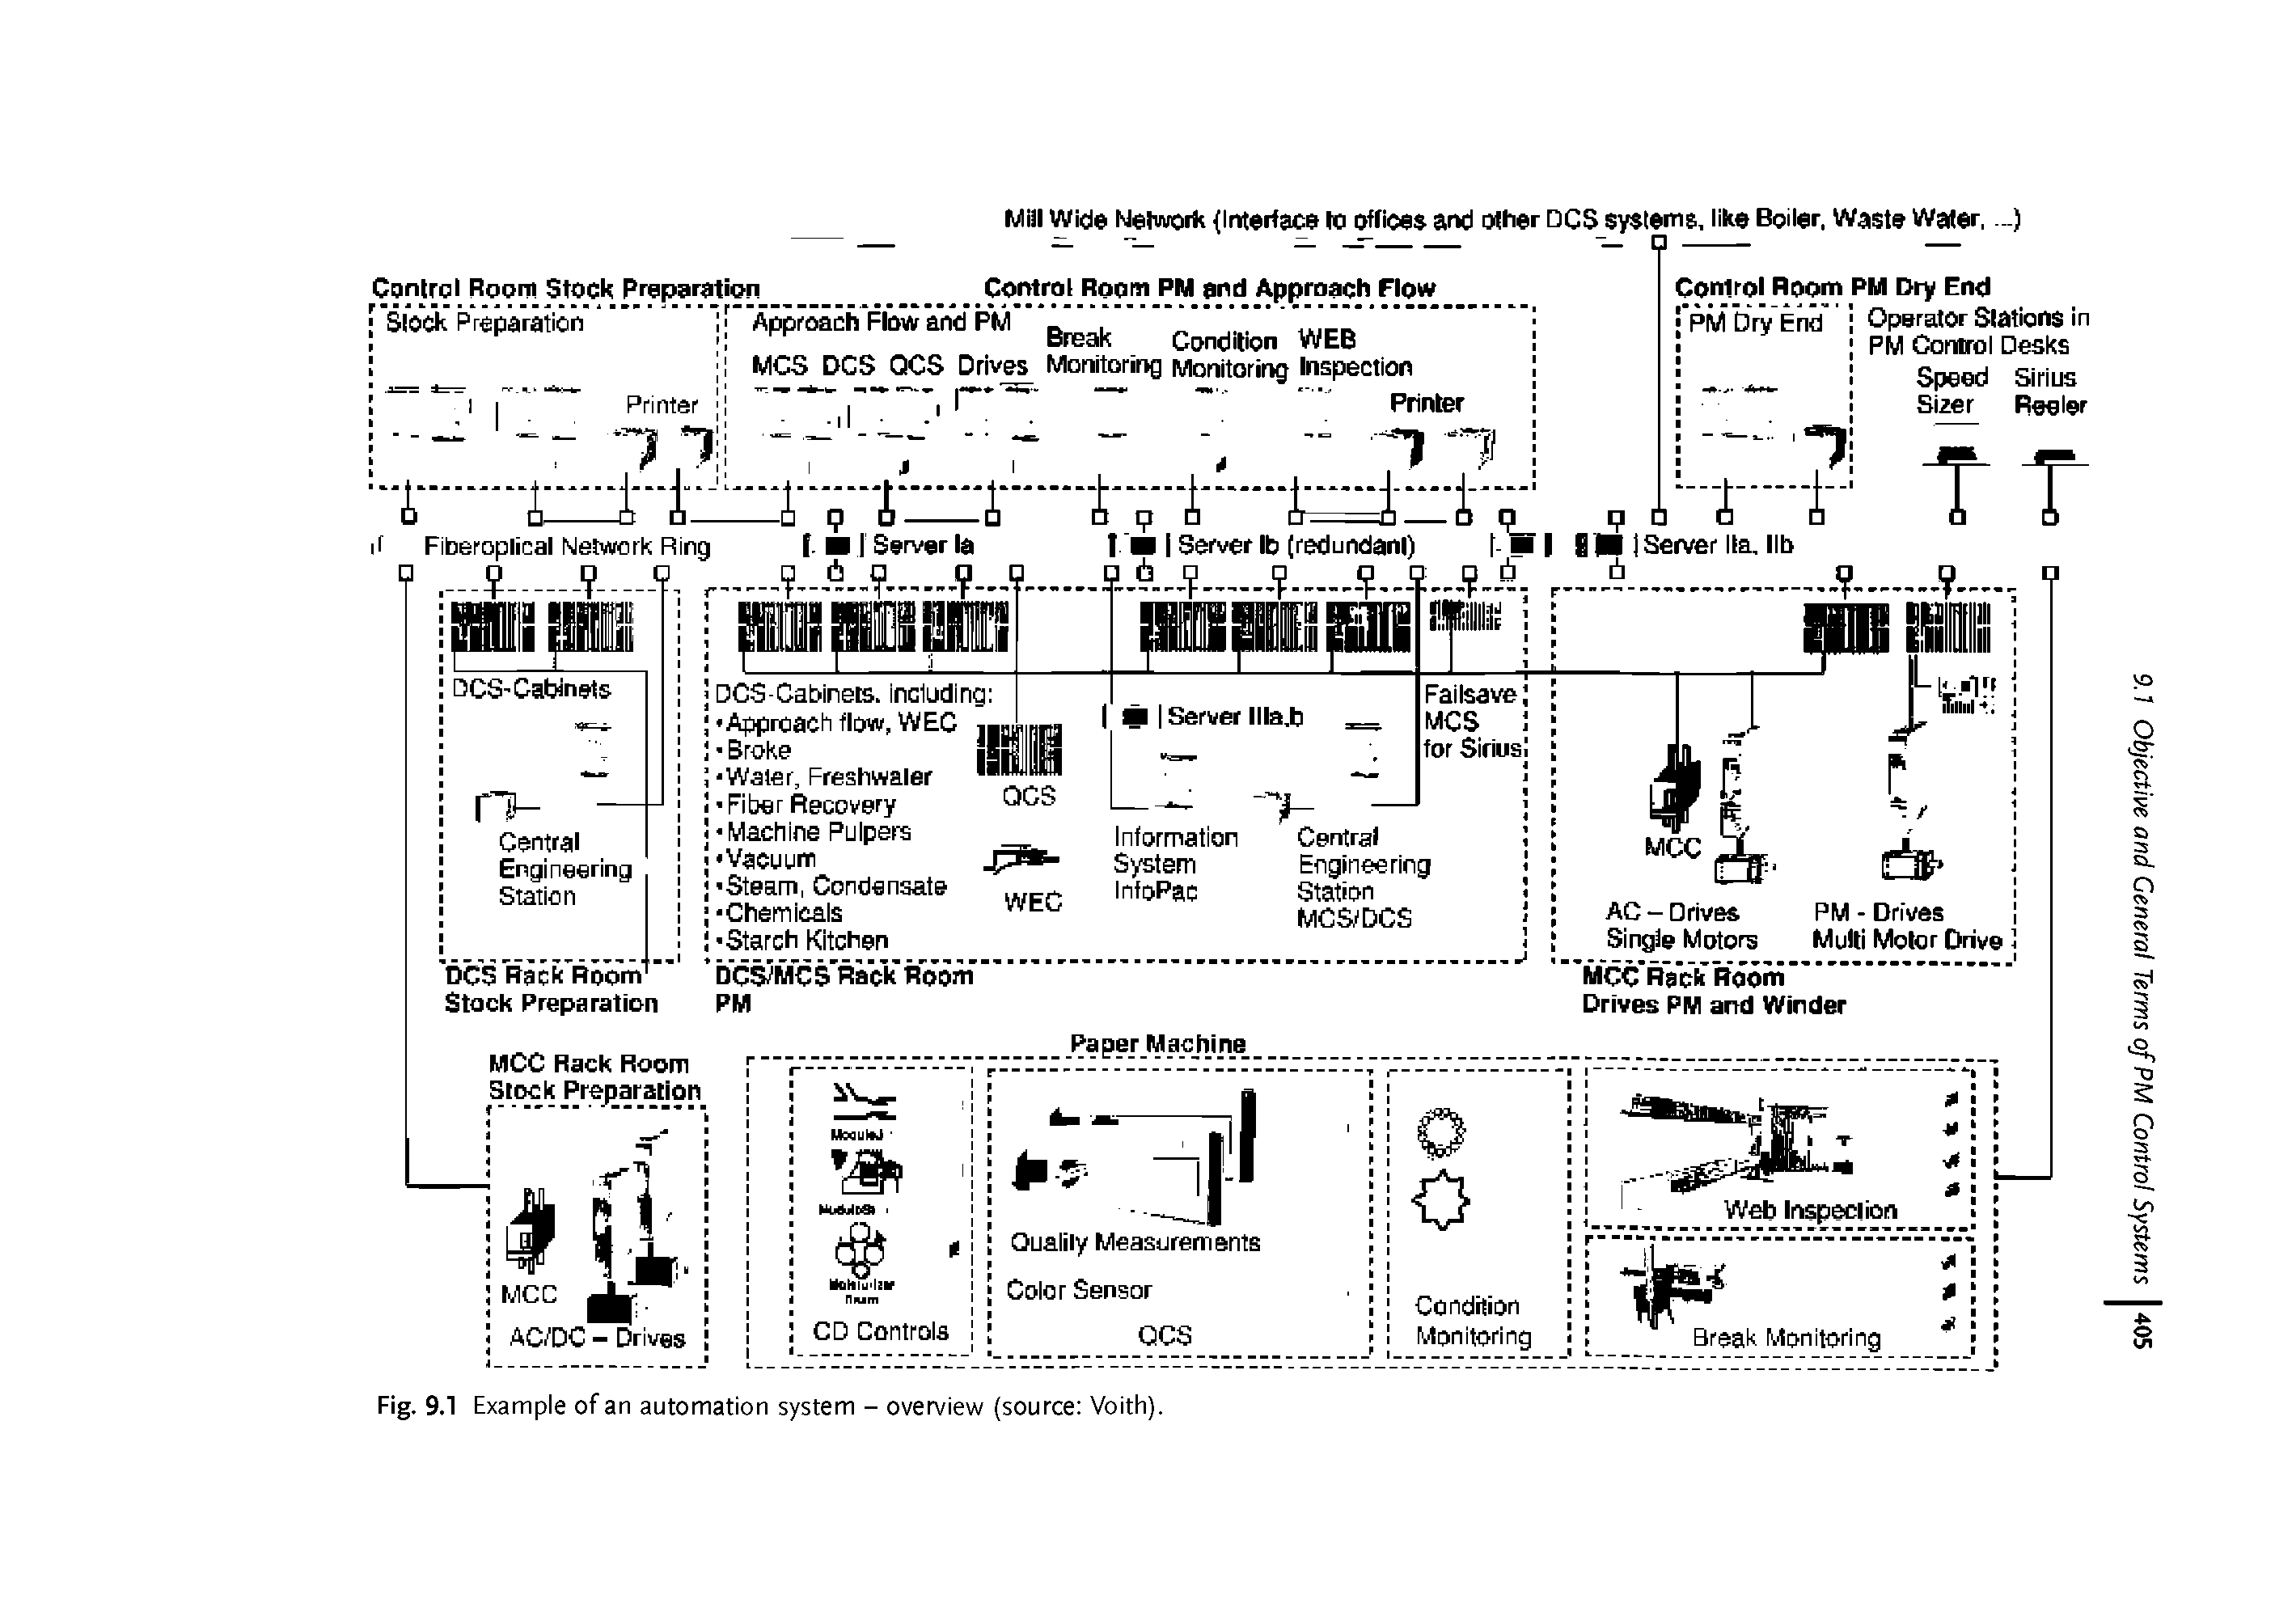 Fig. 9.1 Example of an automation system - overview (source Voith).